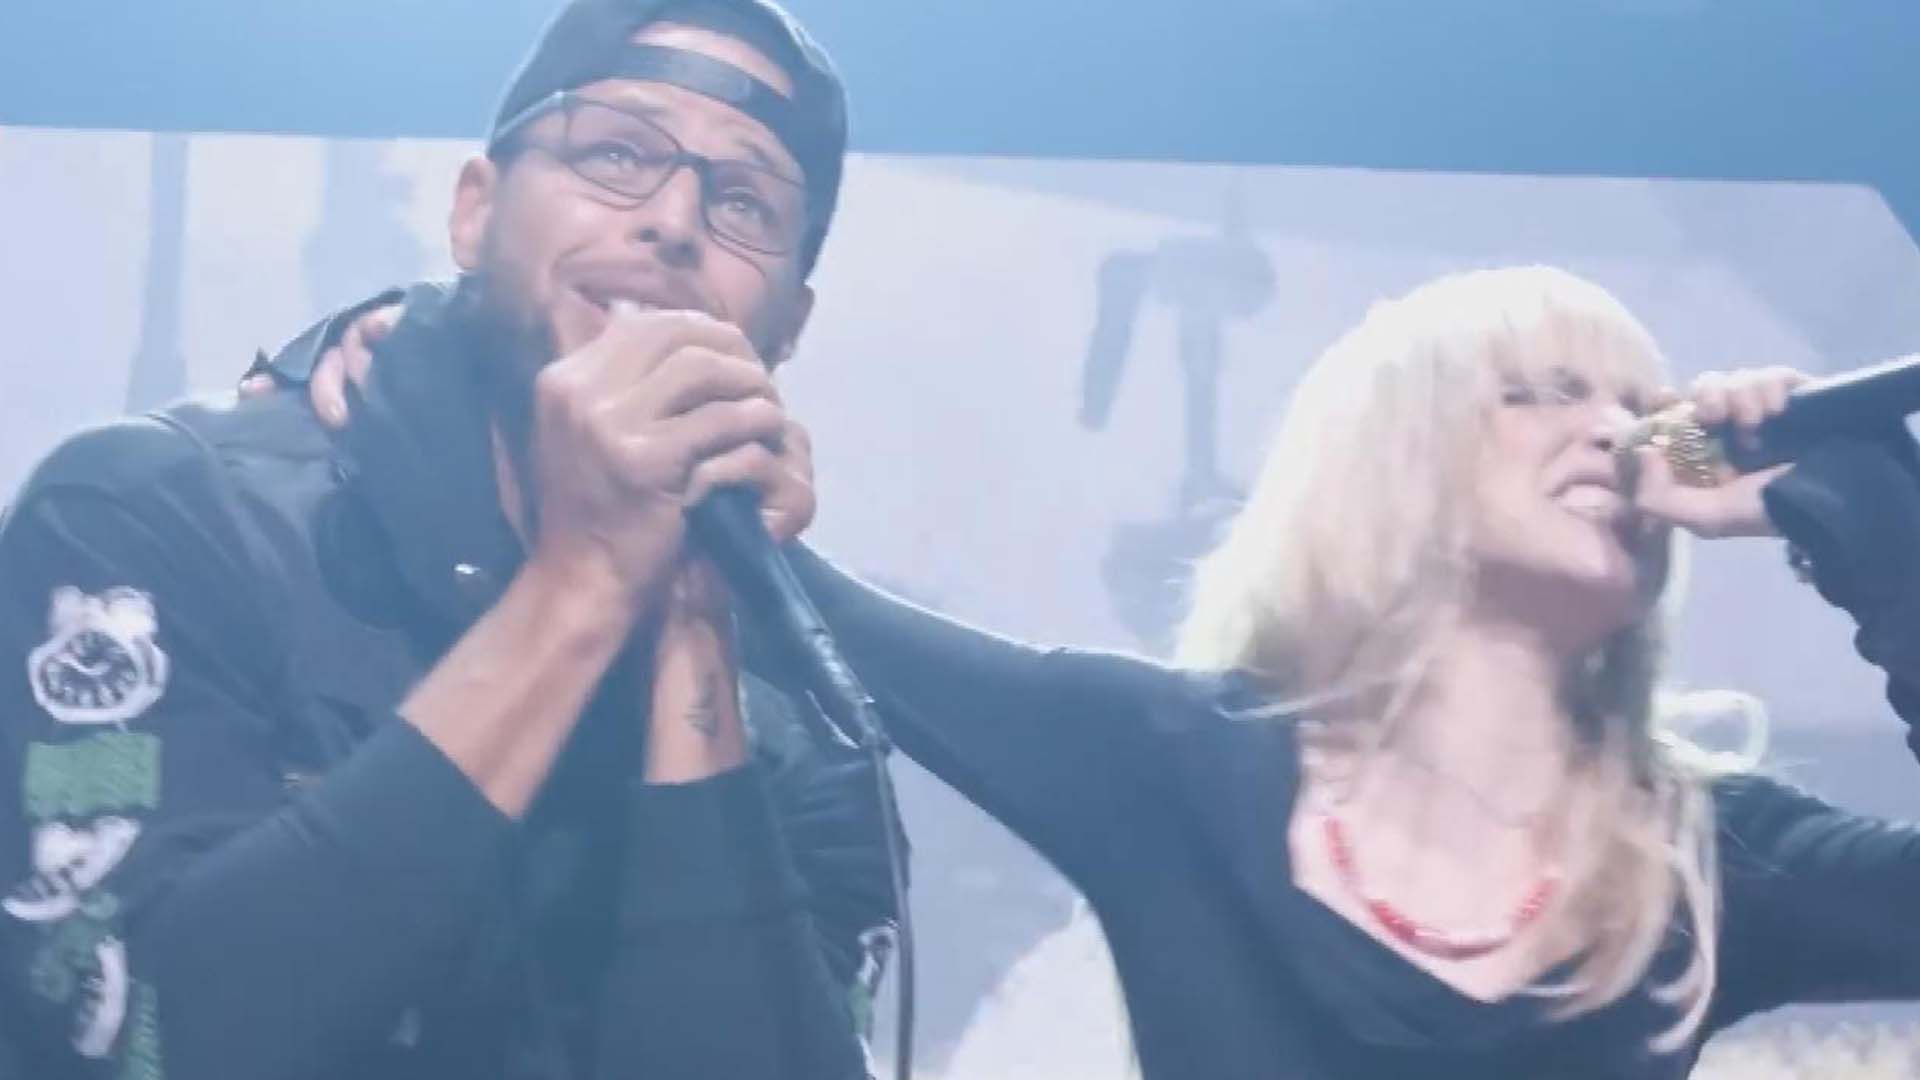 Watch Steph Curry take the mic at a rock concert